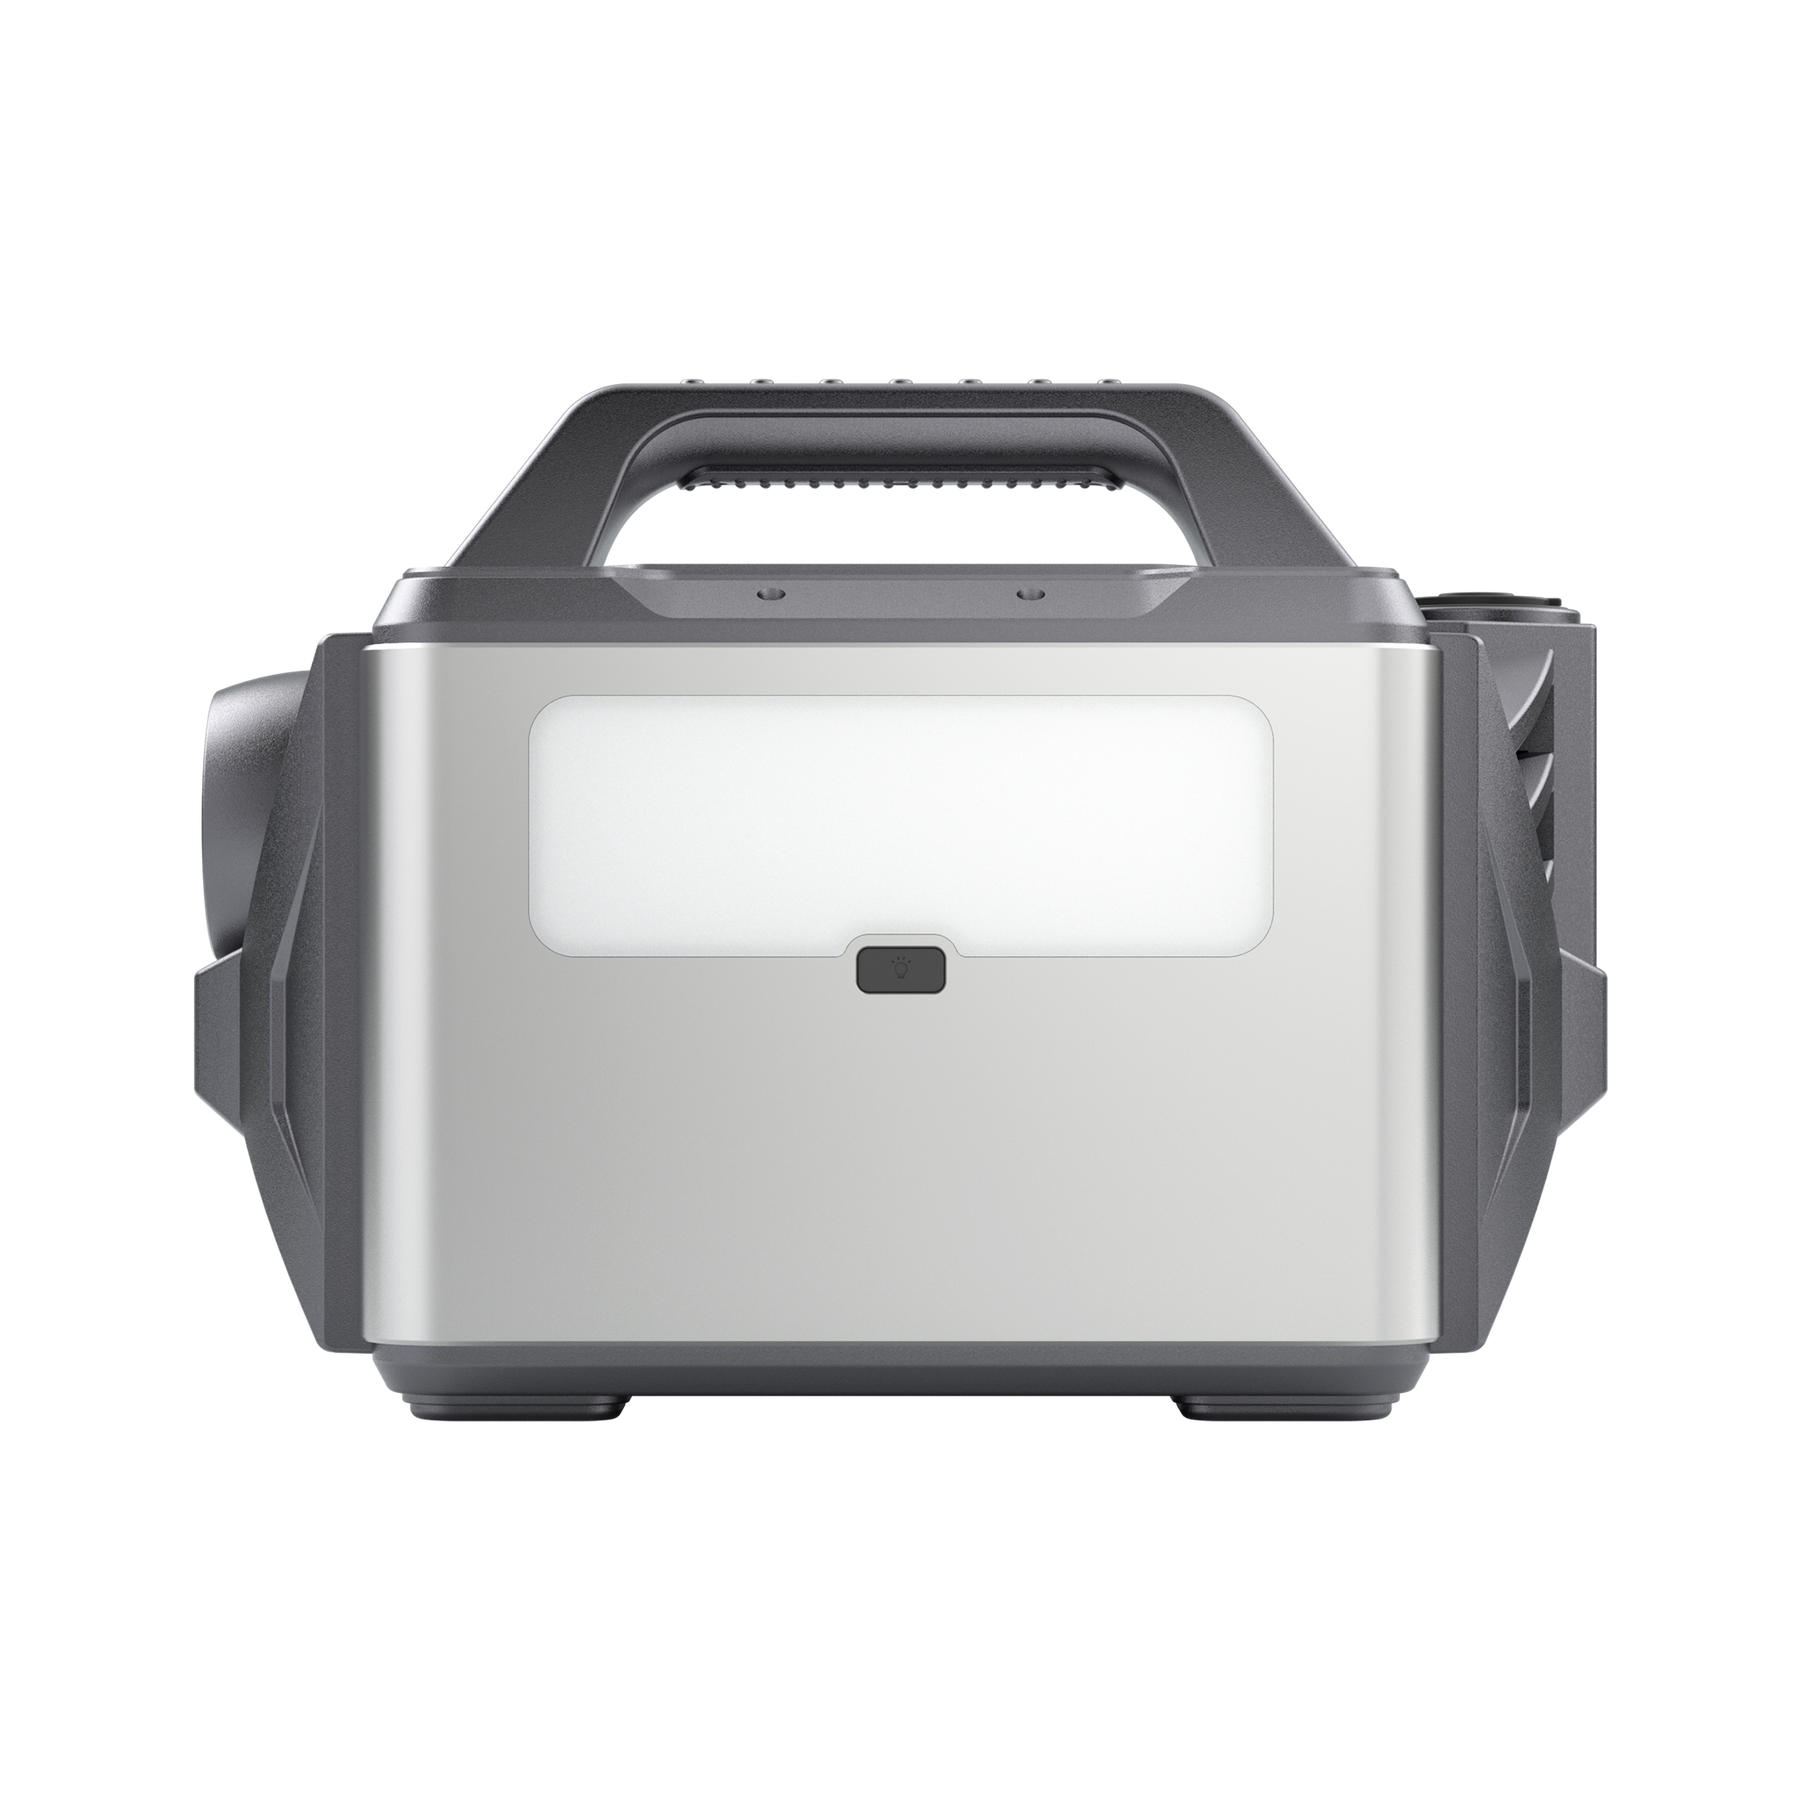 POWEREPUBLIC T306 portable power station, 300W 296Wh, metallic gray body with turbine-engine and aircraft wing design, a handle, and an LED light.